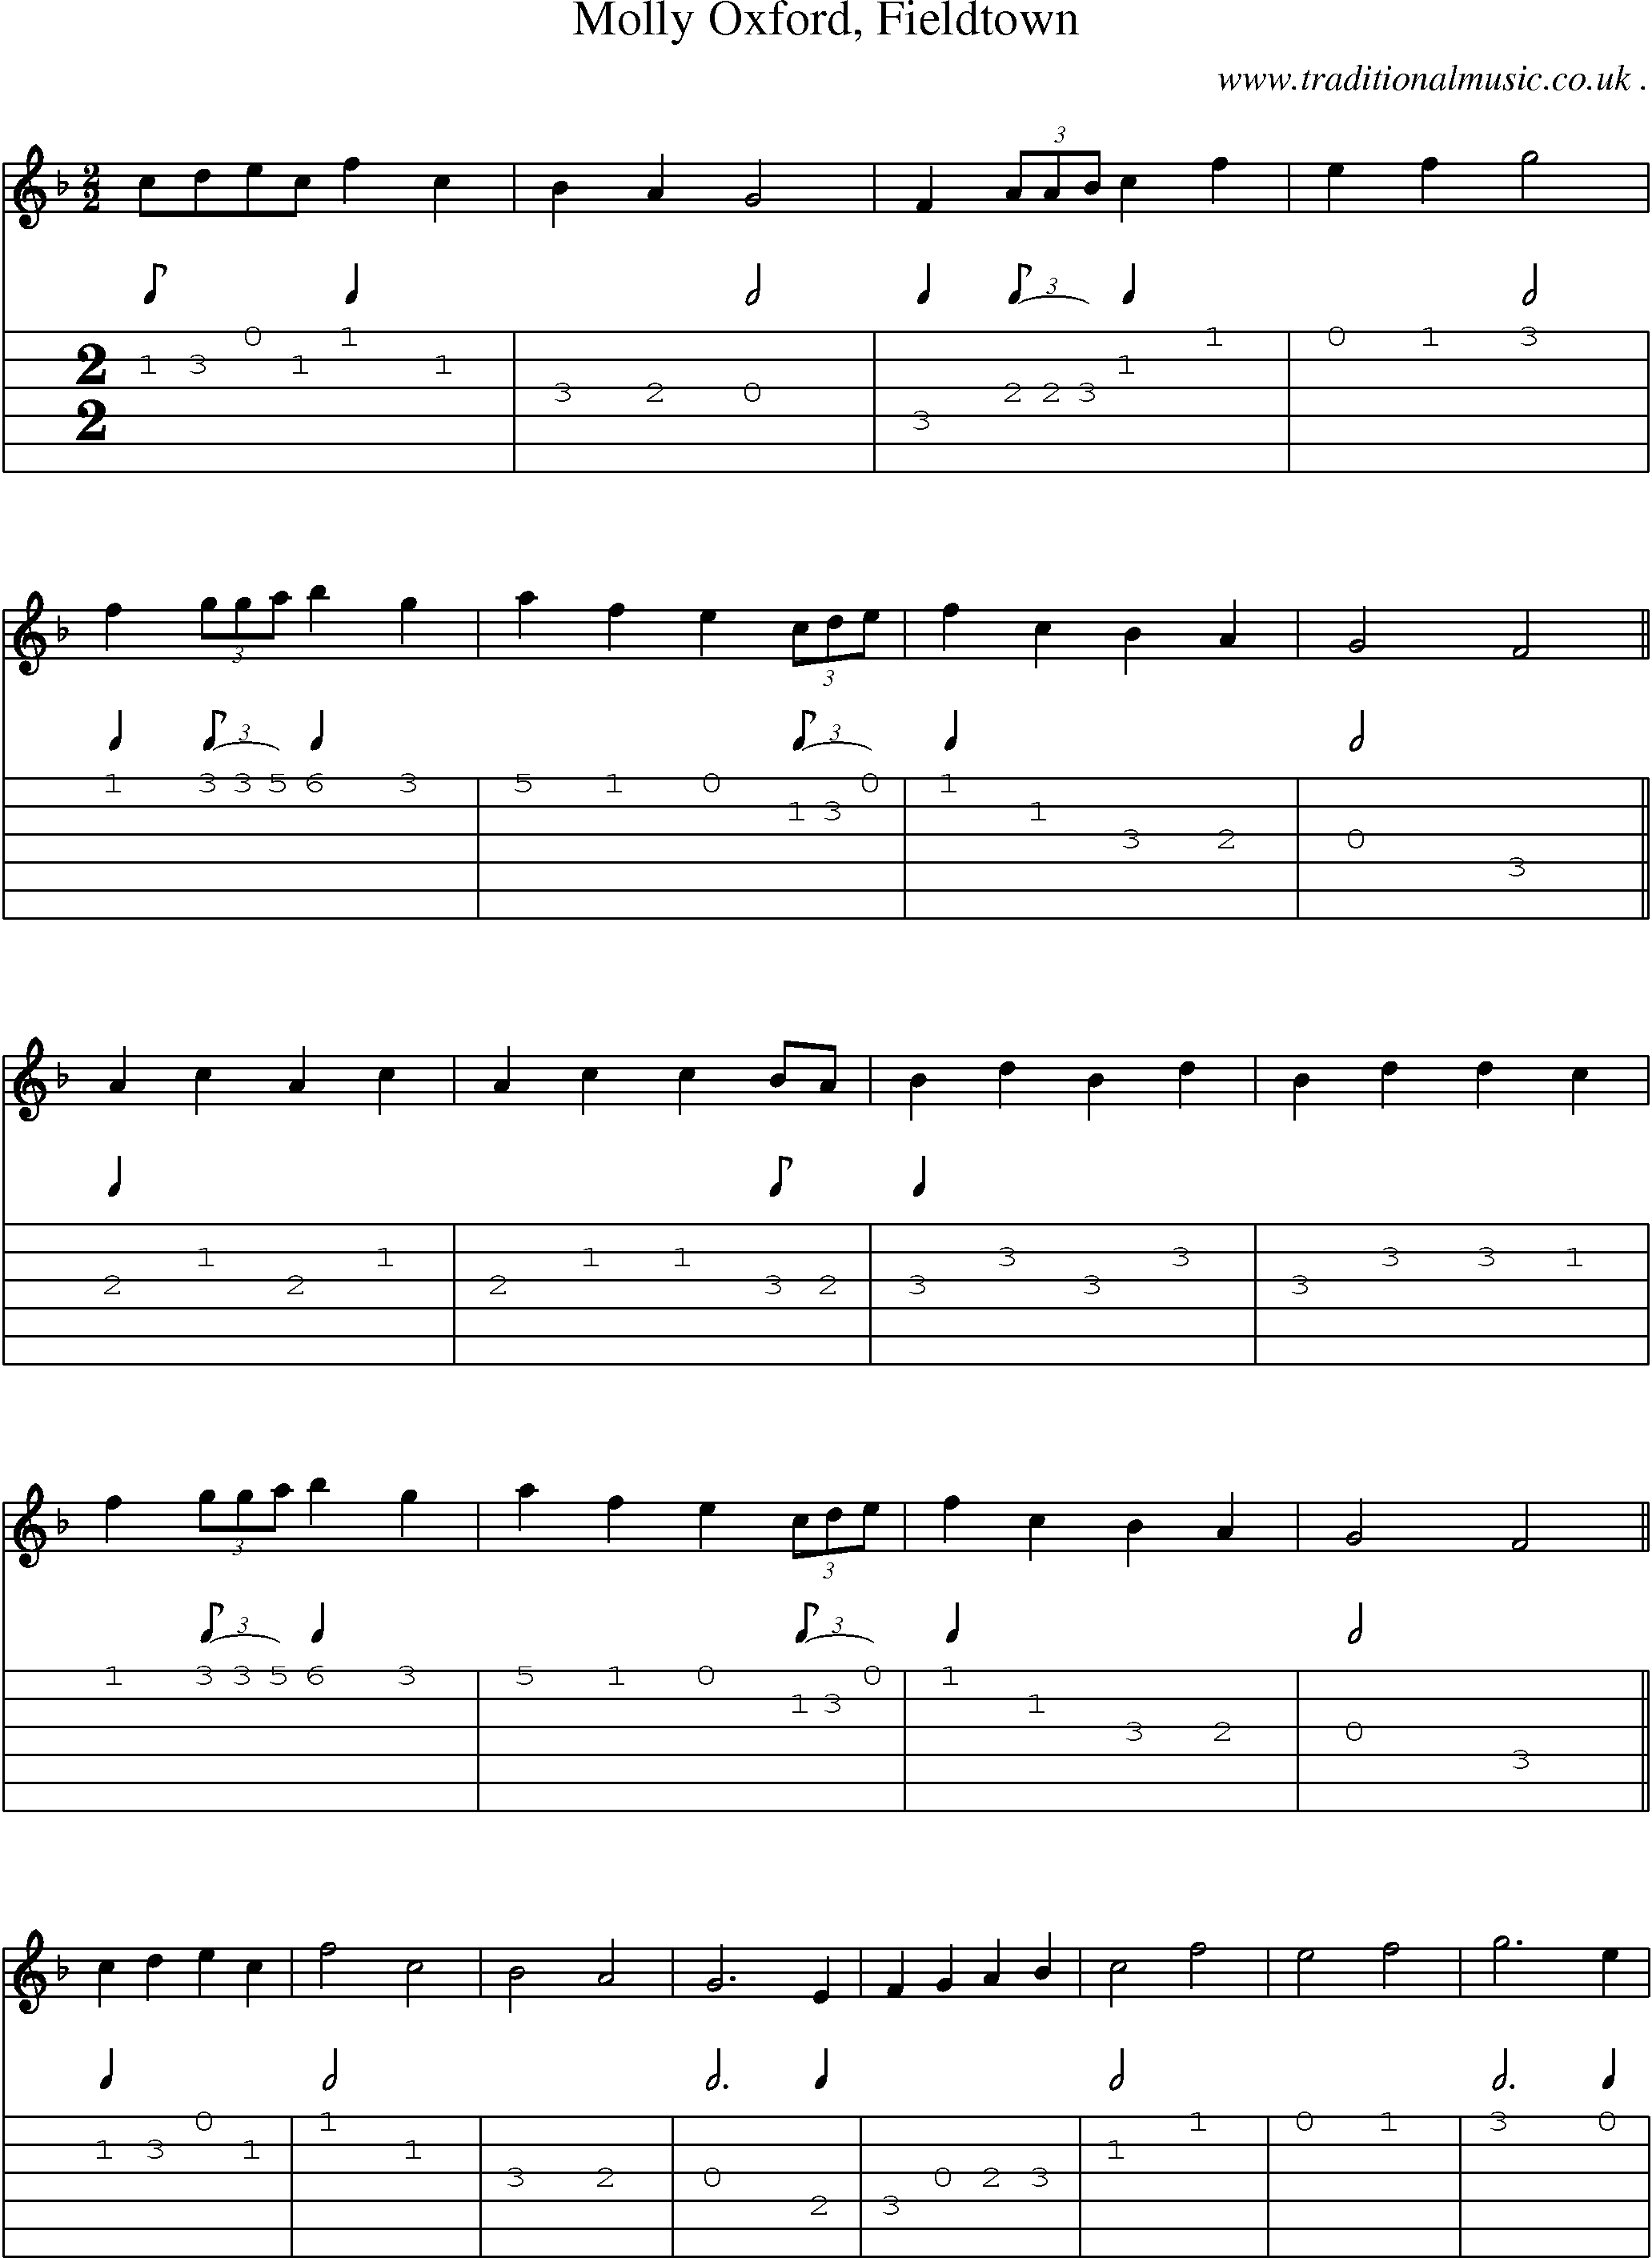 Sheet-Music and Guitar Tabs for Molly Oxford Fieldtown